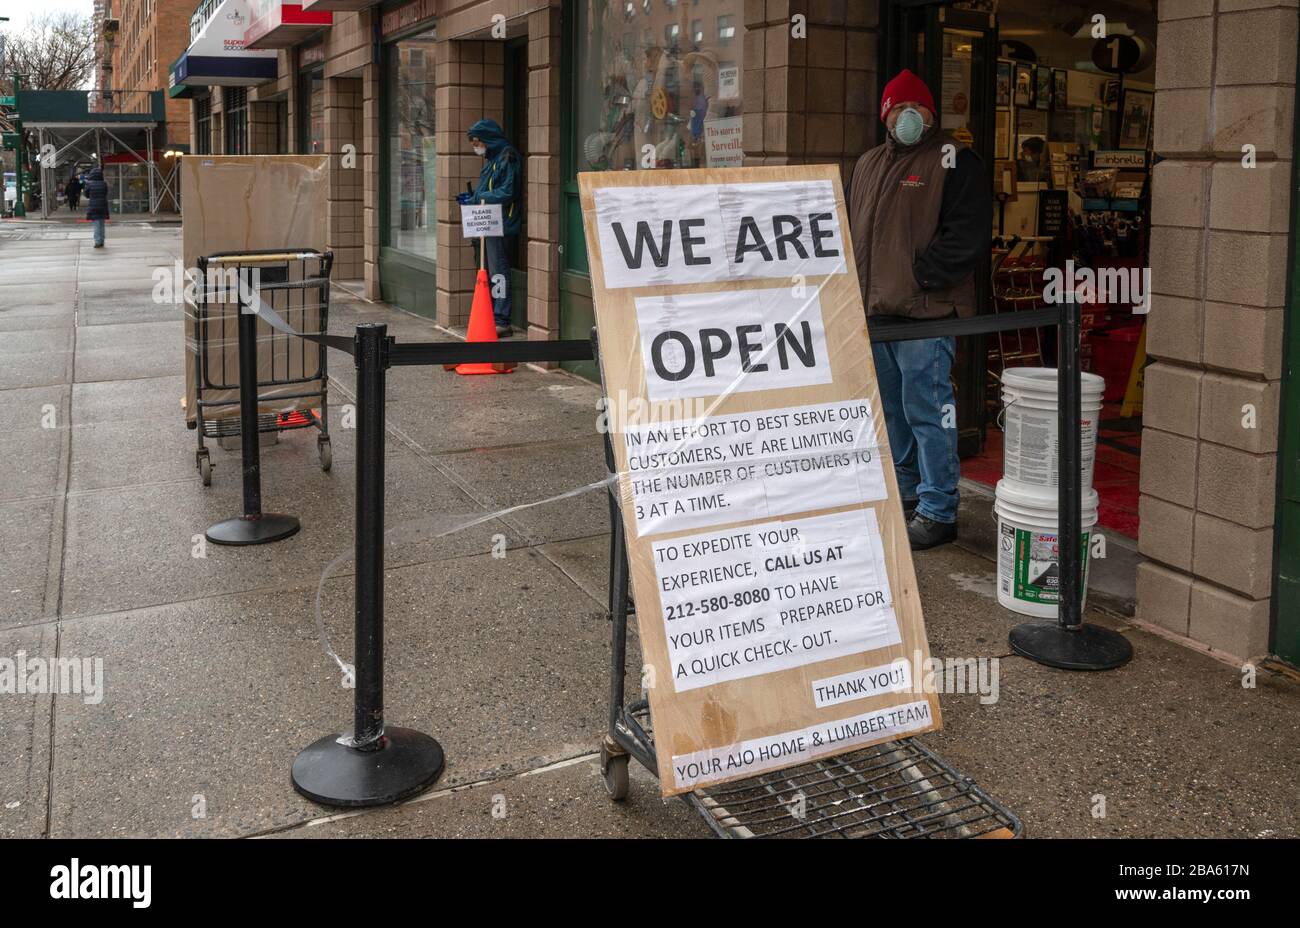 NEW YORK, NY - MARCH 25, 2020. Sign outside an ACE Hardware store on the Upper West Side of Manhattan in New York City during the coronavirus outbreak in New York City. The World Health Organization declared coronavirus (COVID-19) a global pandemic on March 11th. Stock Photo